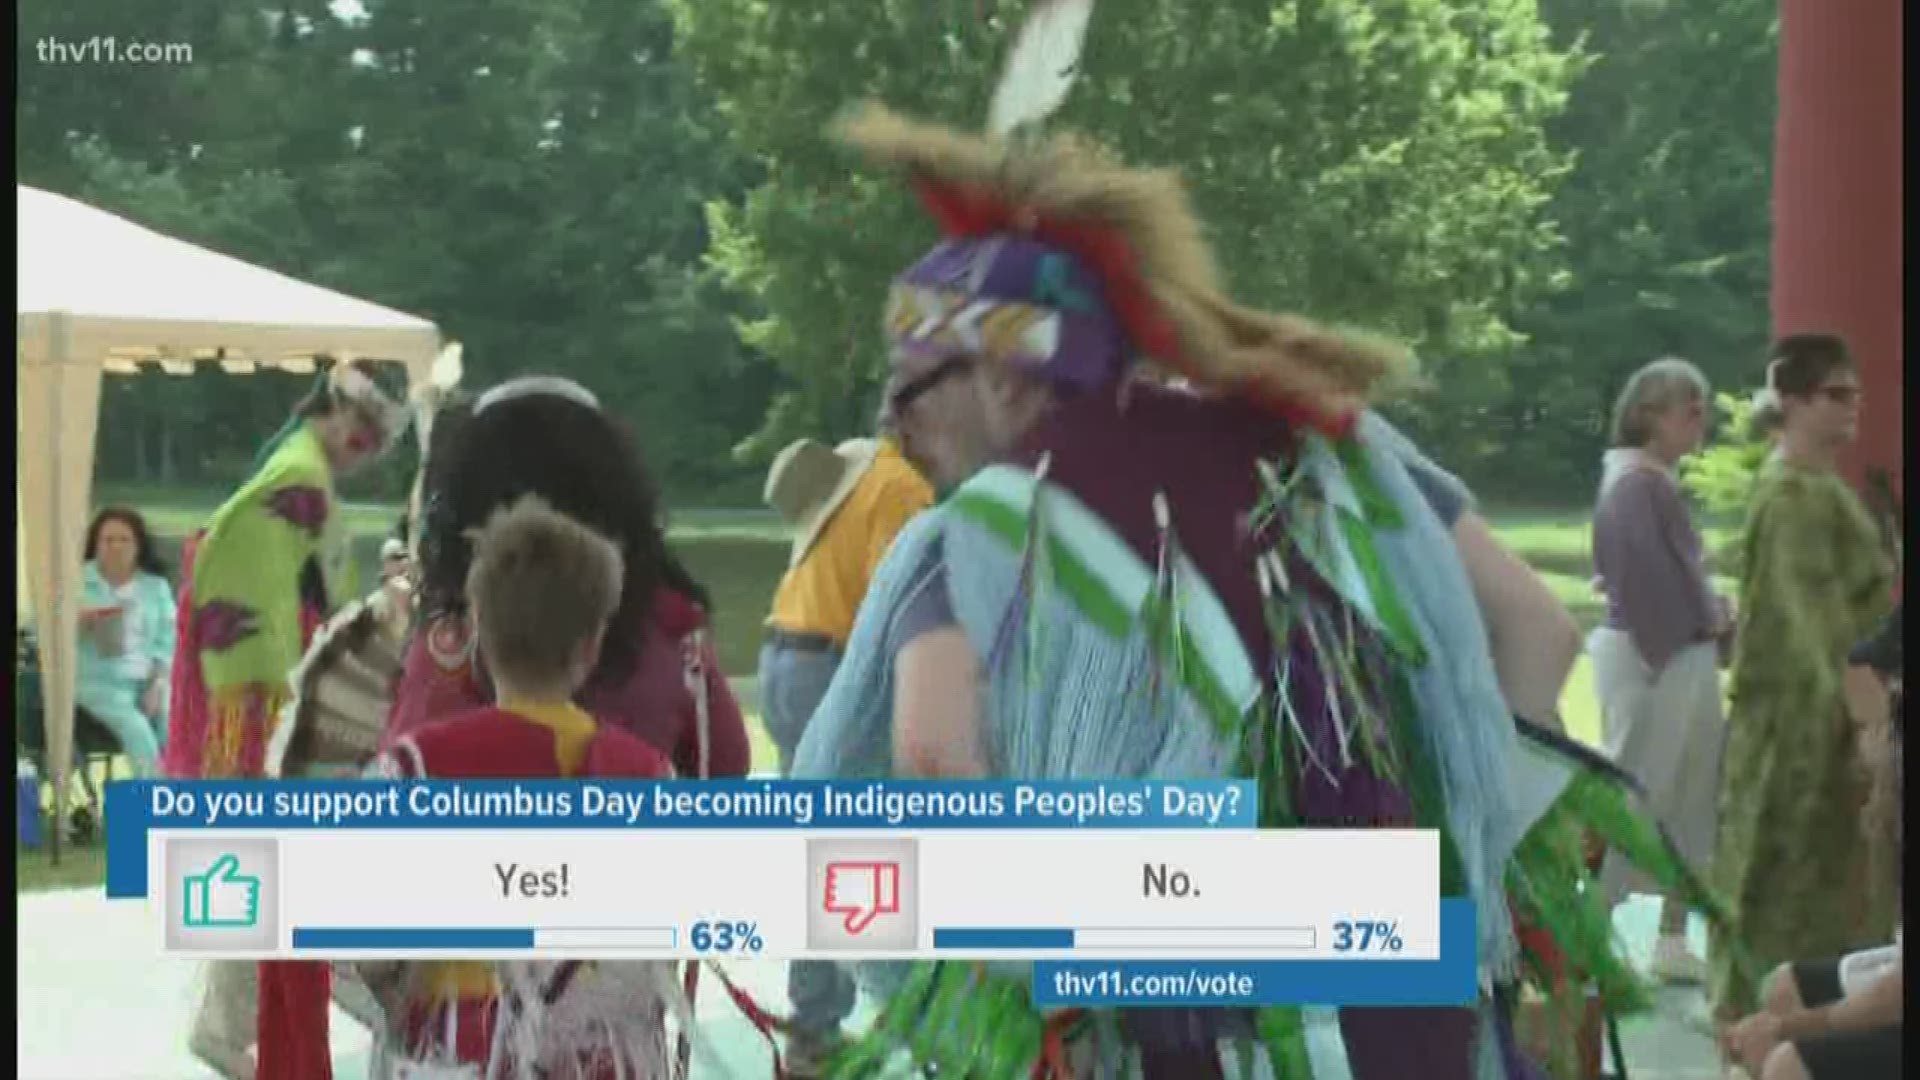 A group in Arkansas is celebrating Indigenous Peoples' Day instead of Columbus Day. And they're hoping to make it an official state holiday.